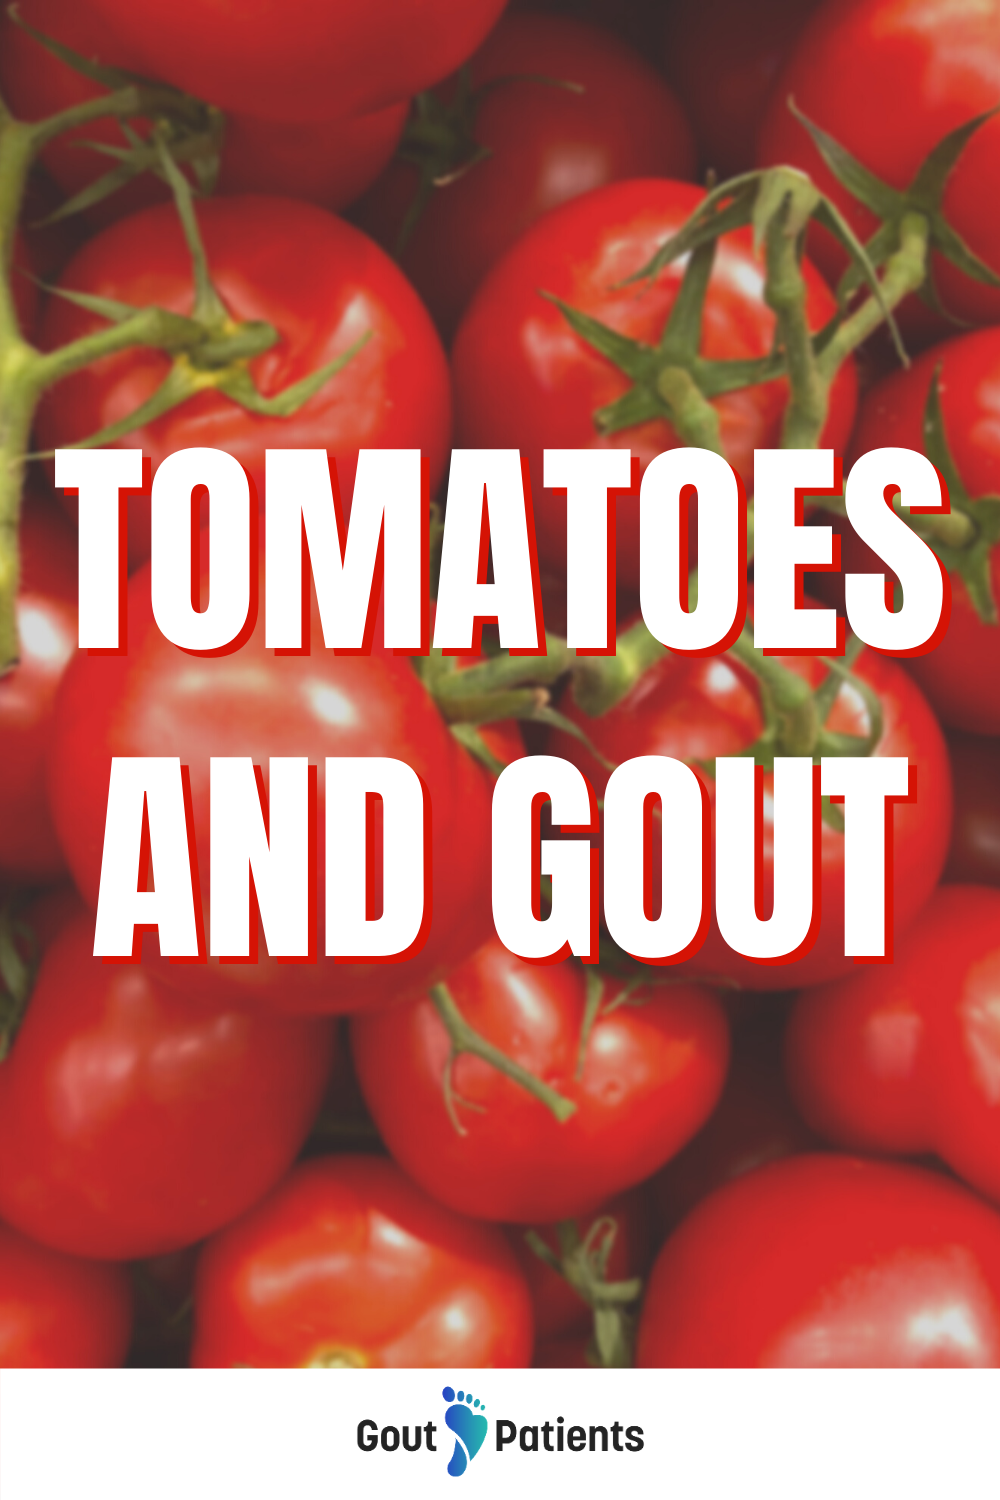 Tomatoes and Gout in 2020